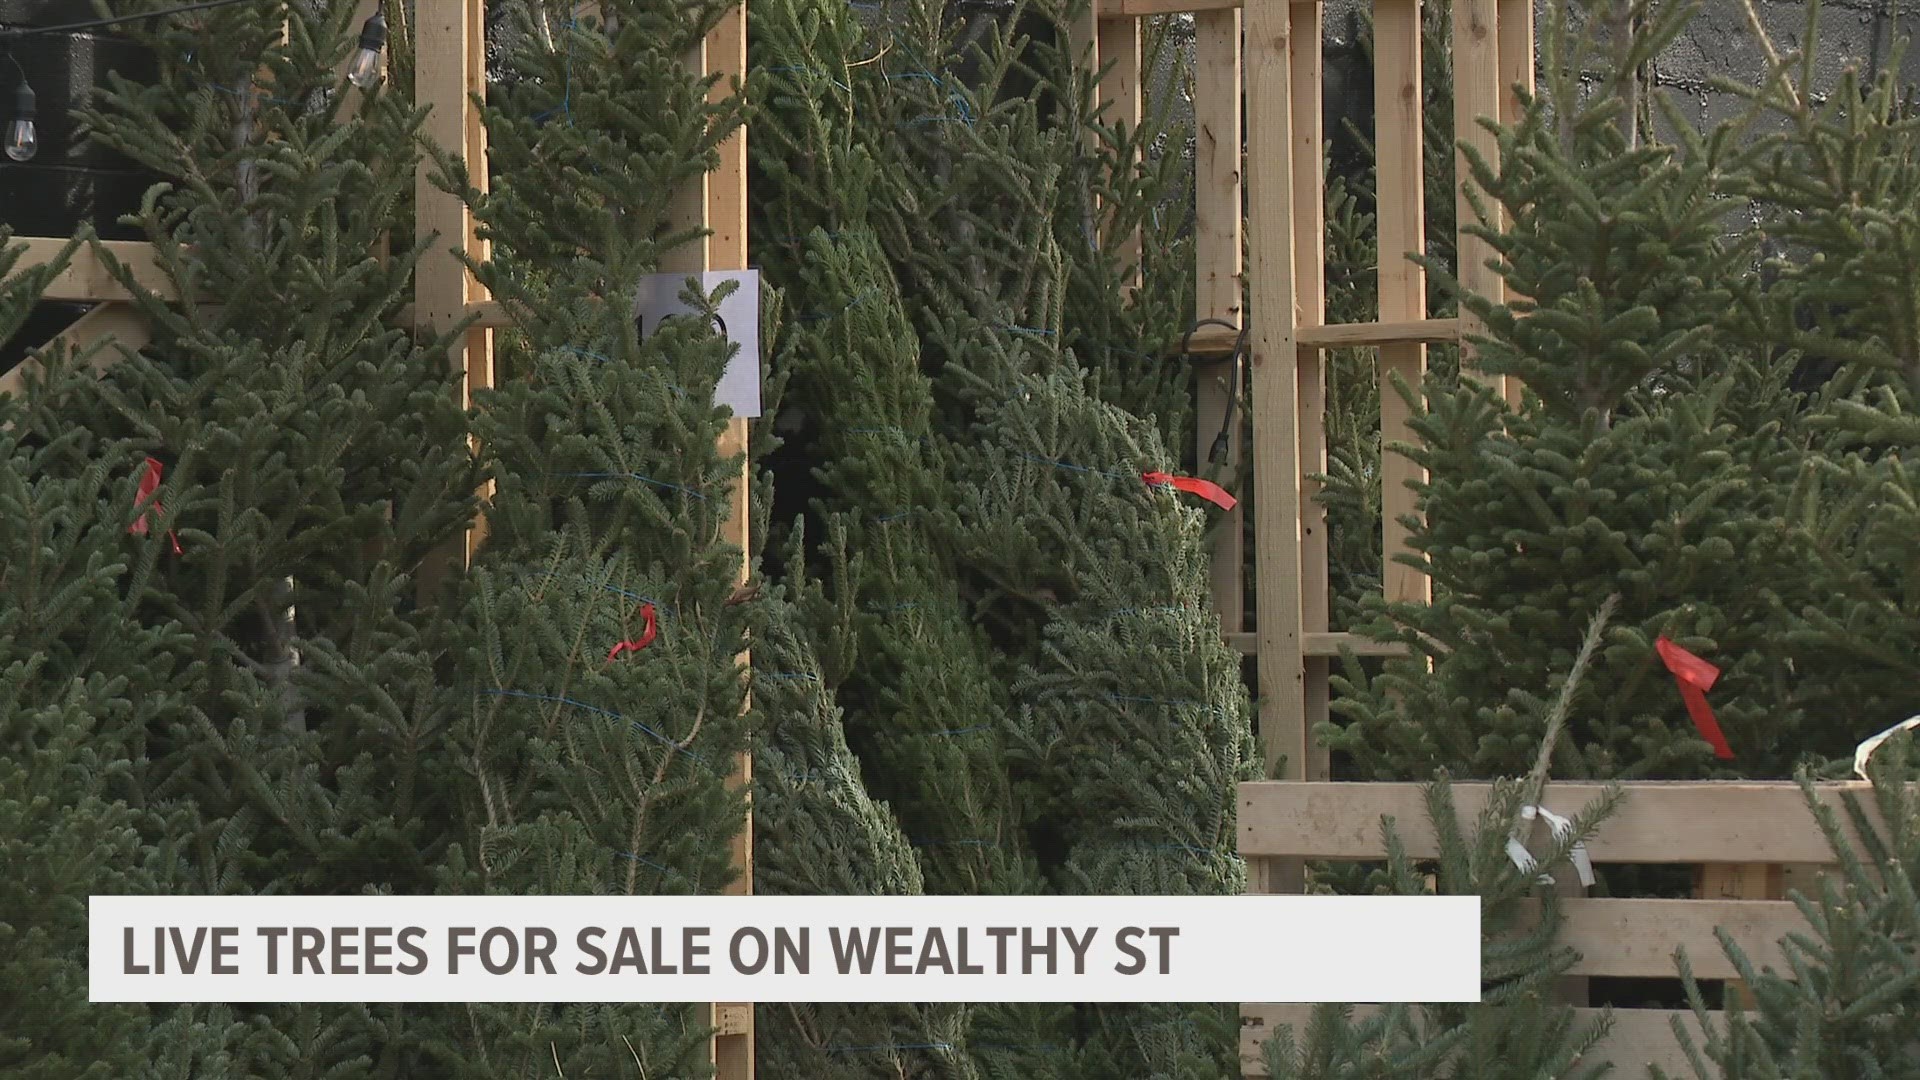 Paddle North, located at 1048 Wealthy Street SE in Grand Rapids, has opened up a pop-up shop selling real Christmas trees for the holiday season.